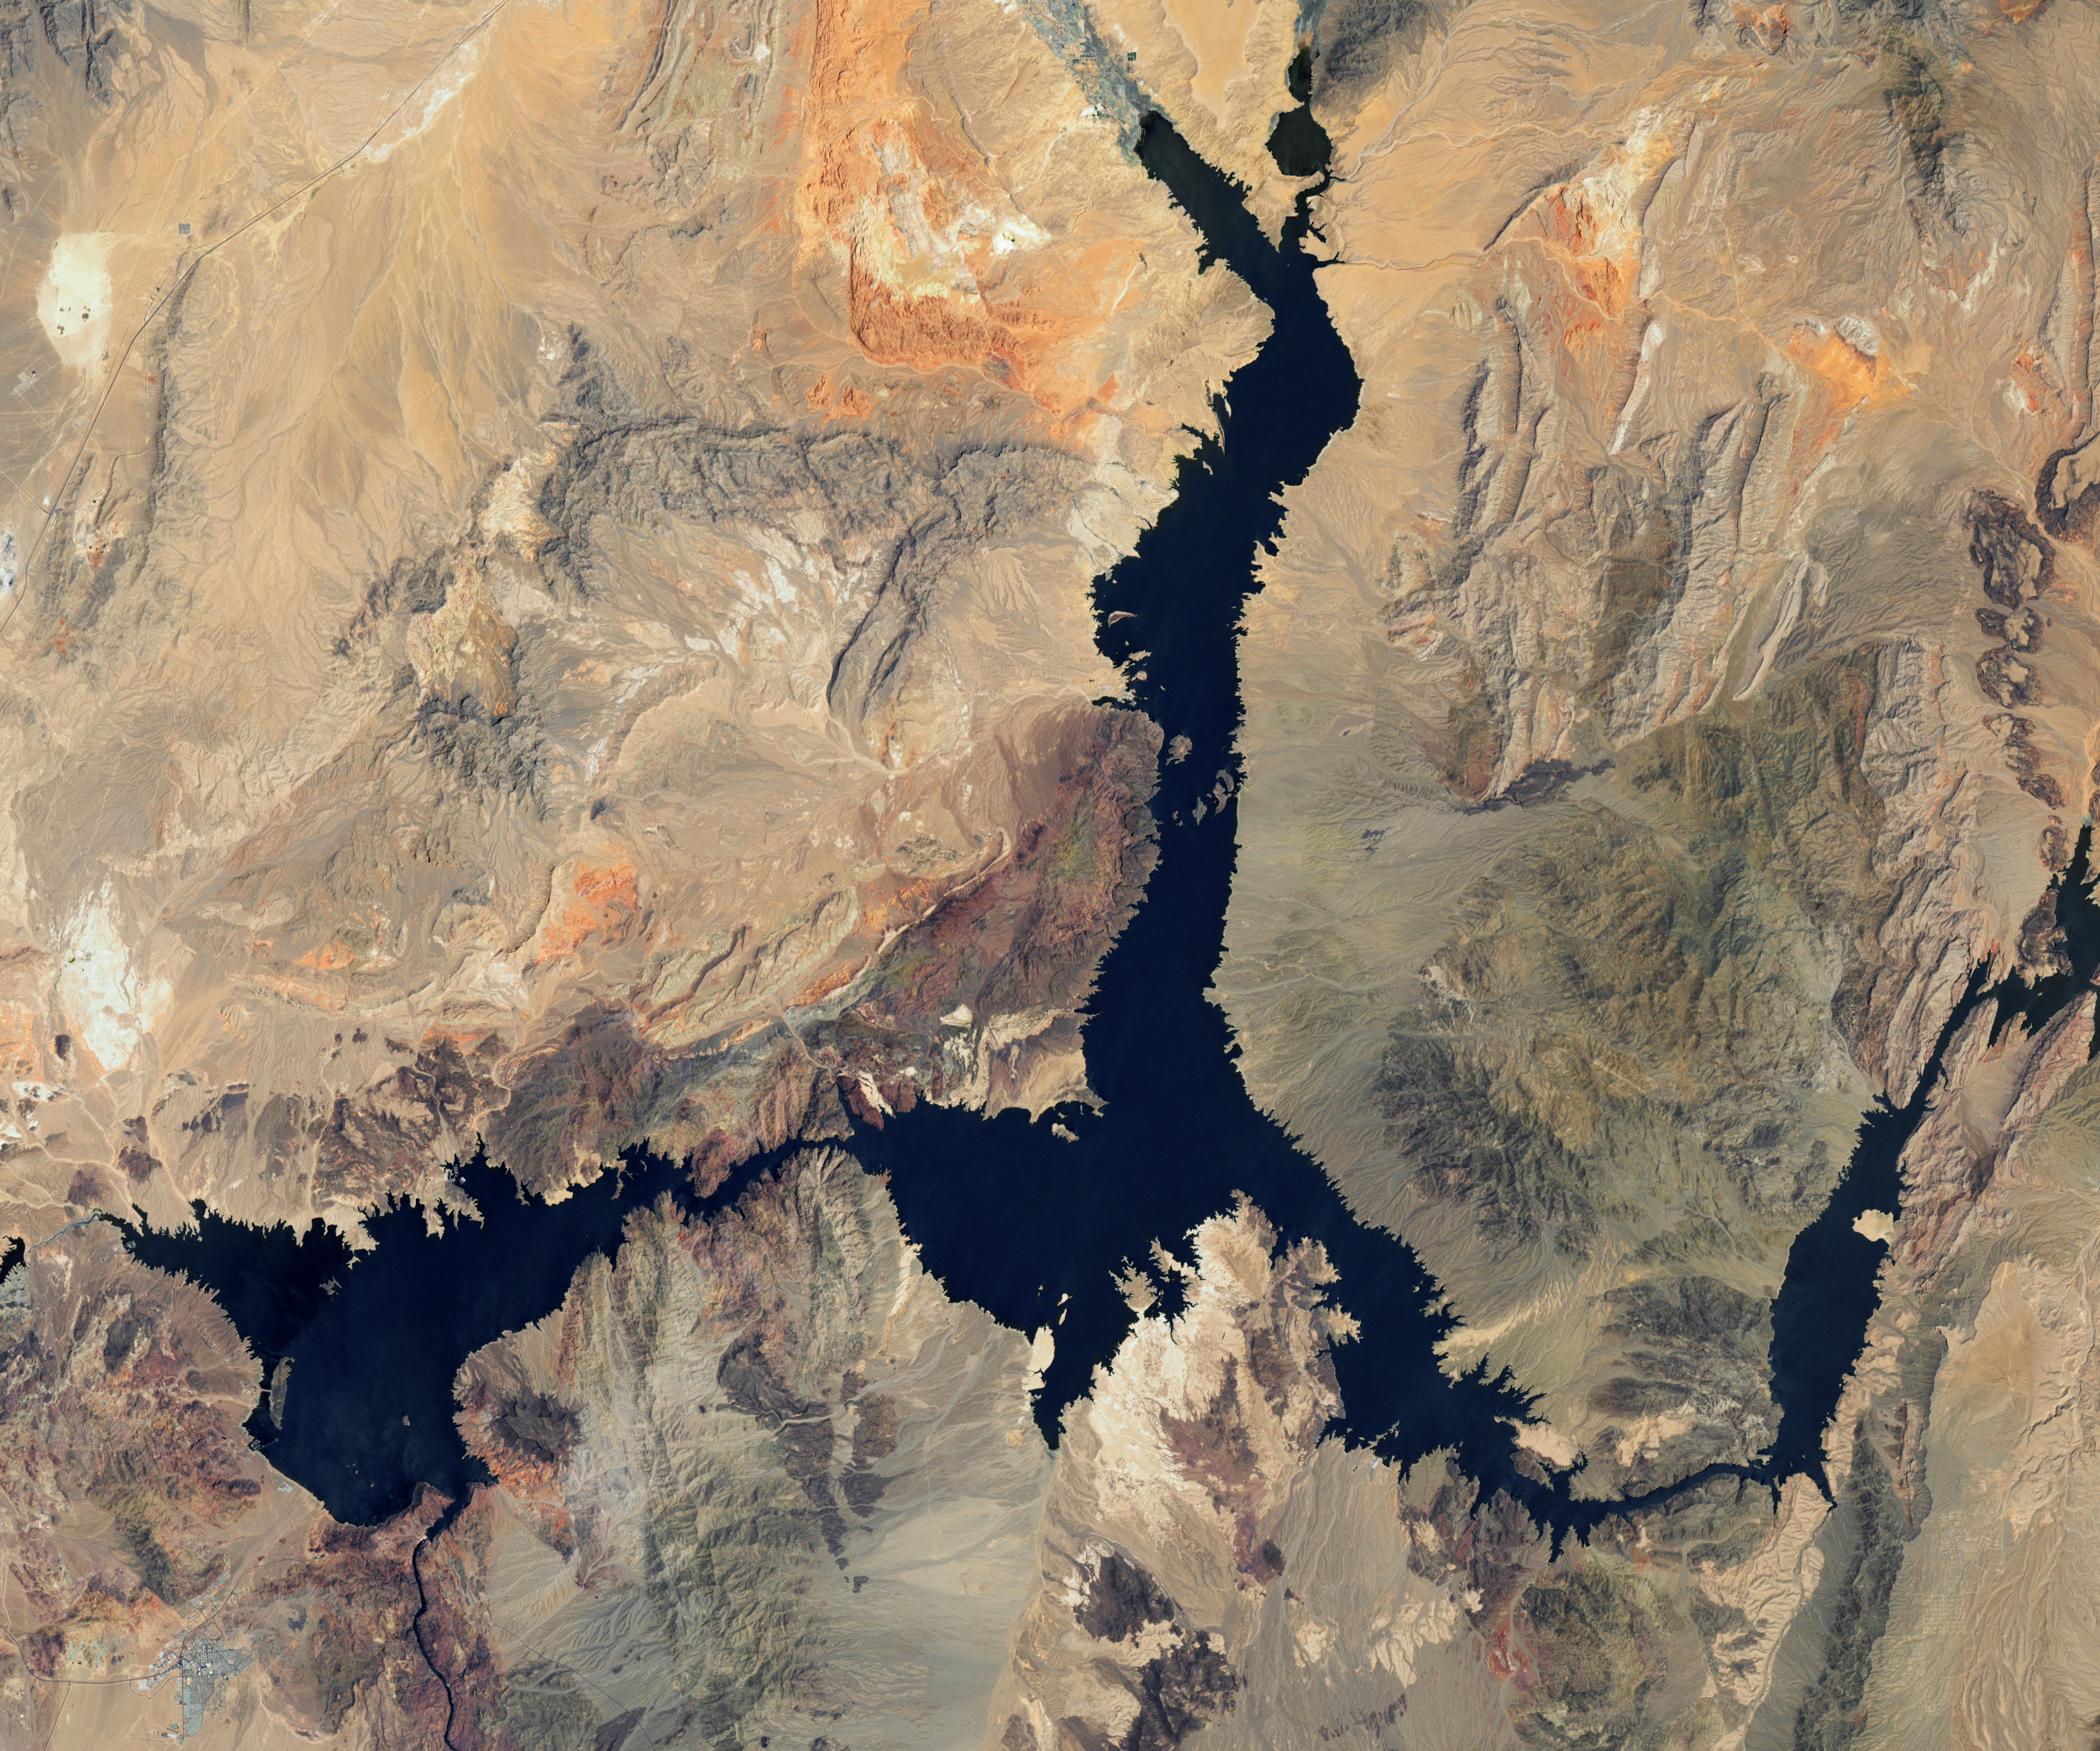 Lake Mead drought shown in dramatic new NASA images Tablinx